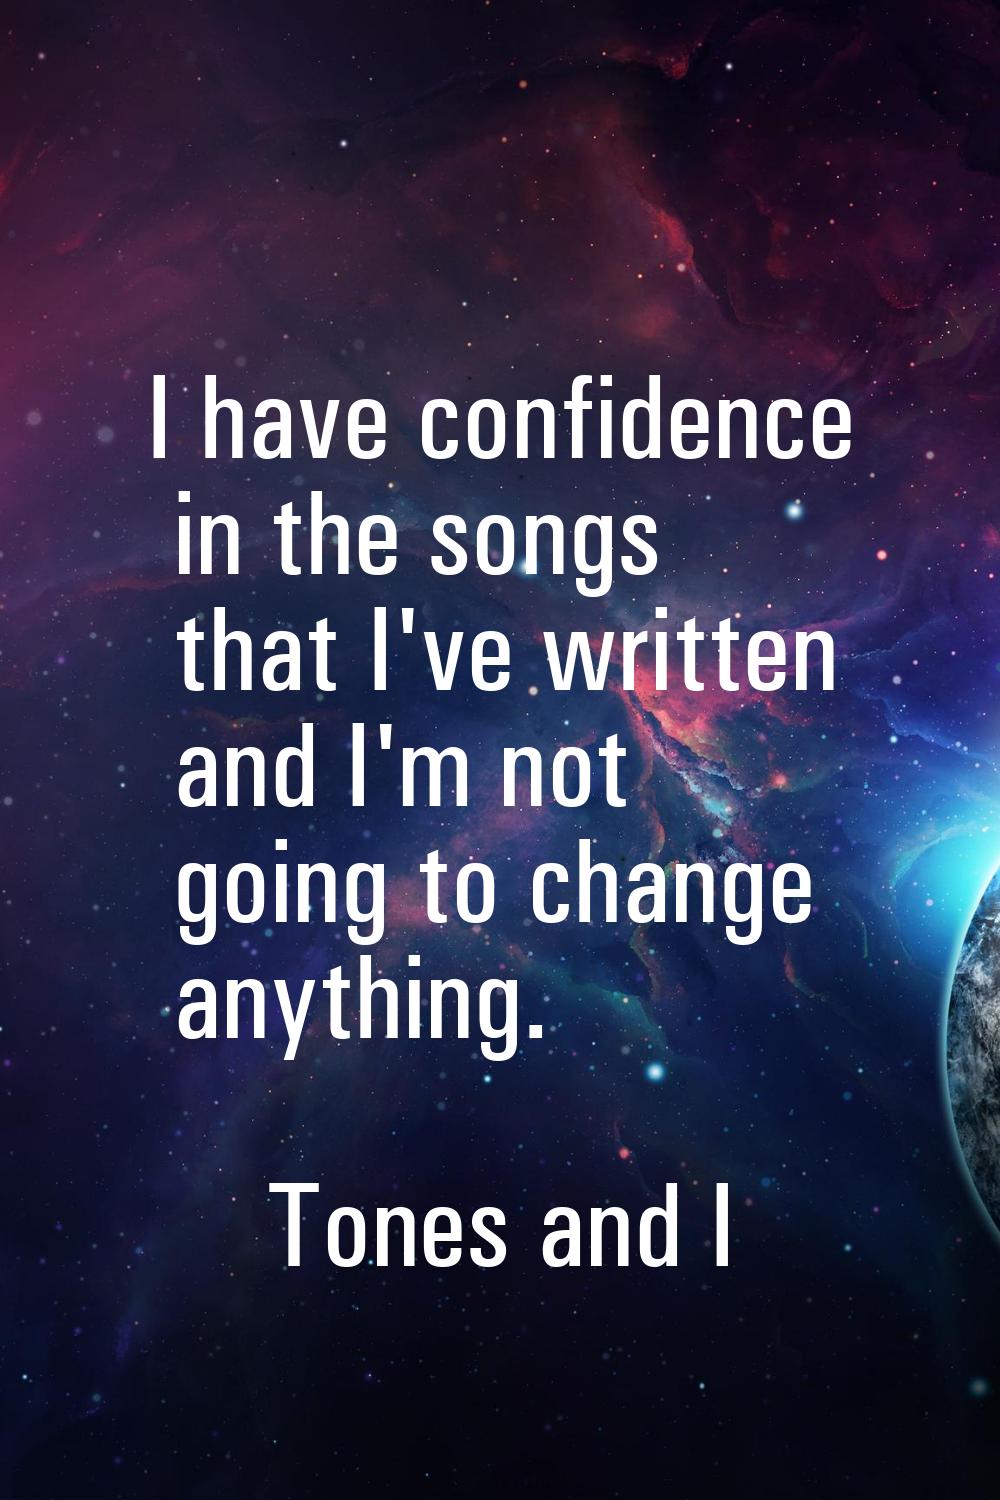 I have confidence in the songs that I've written and I'm not going to change anything.